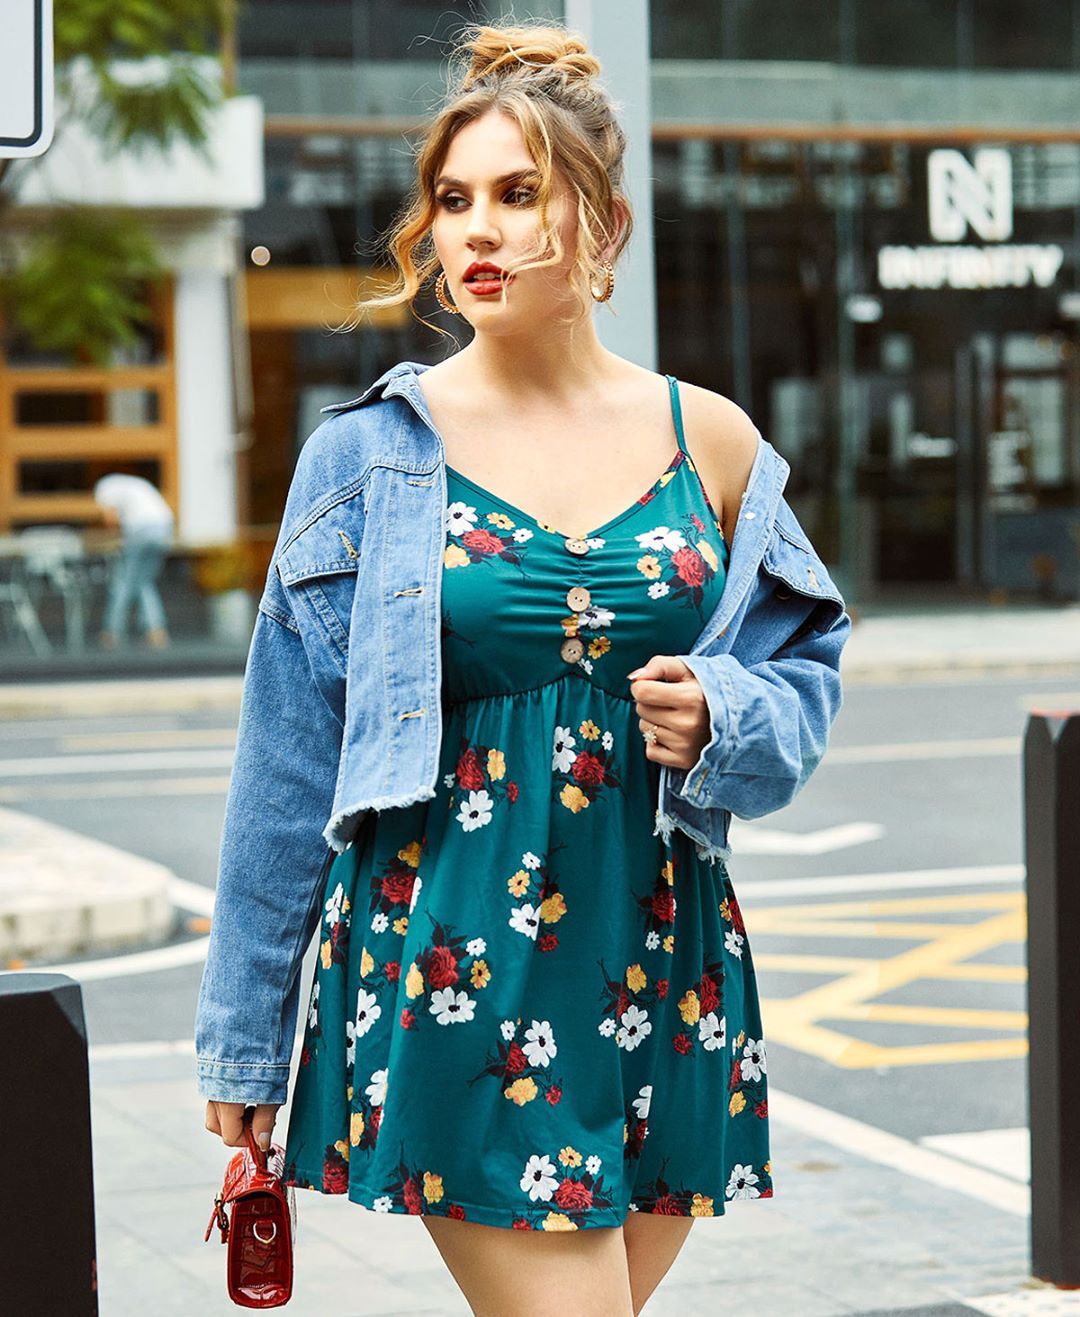 Rosegal - Plus Size Cami Top⁣
⁣
Search ID: 468230001⁣
Use Code: RGH20 to enjoy 18% off!⁣
#rosegal #plussizefashion #Rosegalcurvygirl #curvygirl⁣
Note: How to find the item, please check the first stor...